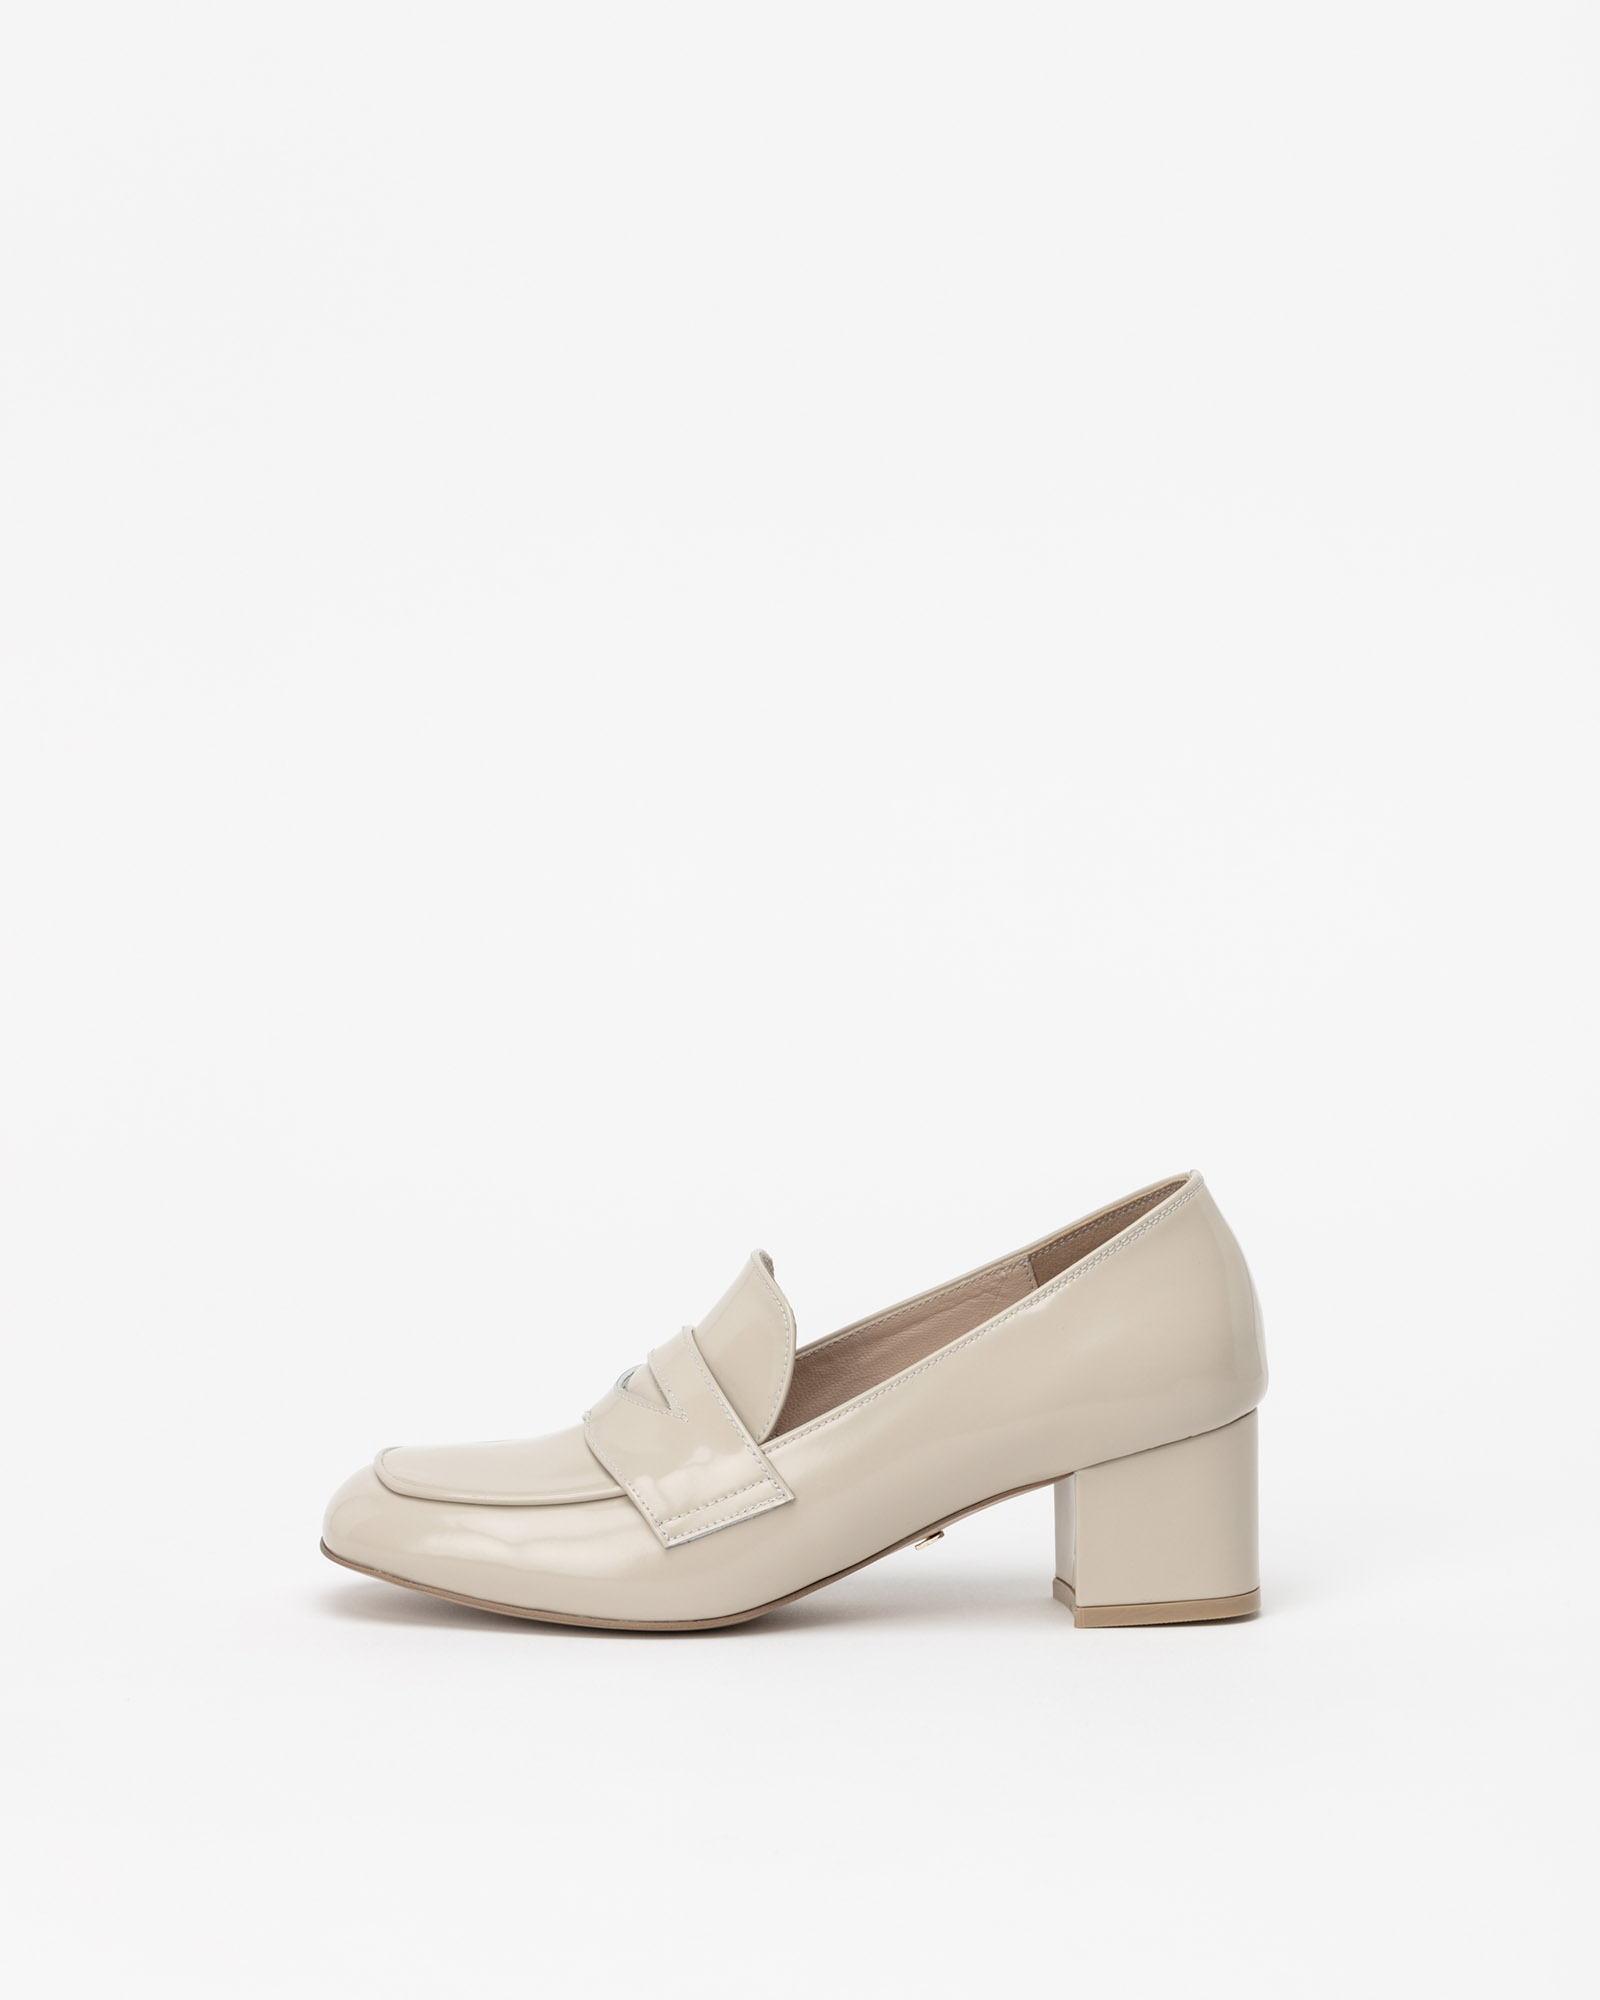 Taffy Loafer Pumps in Cream Ivory Box